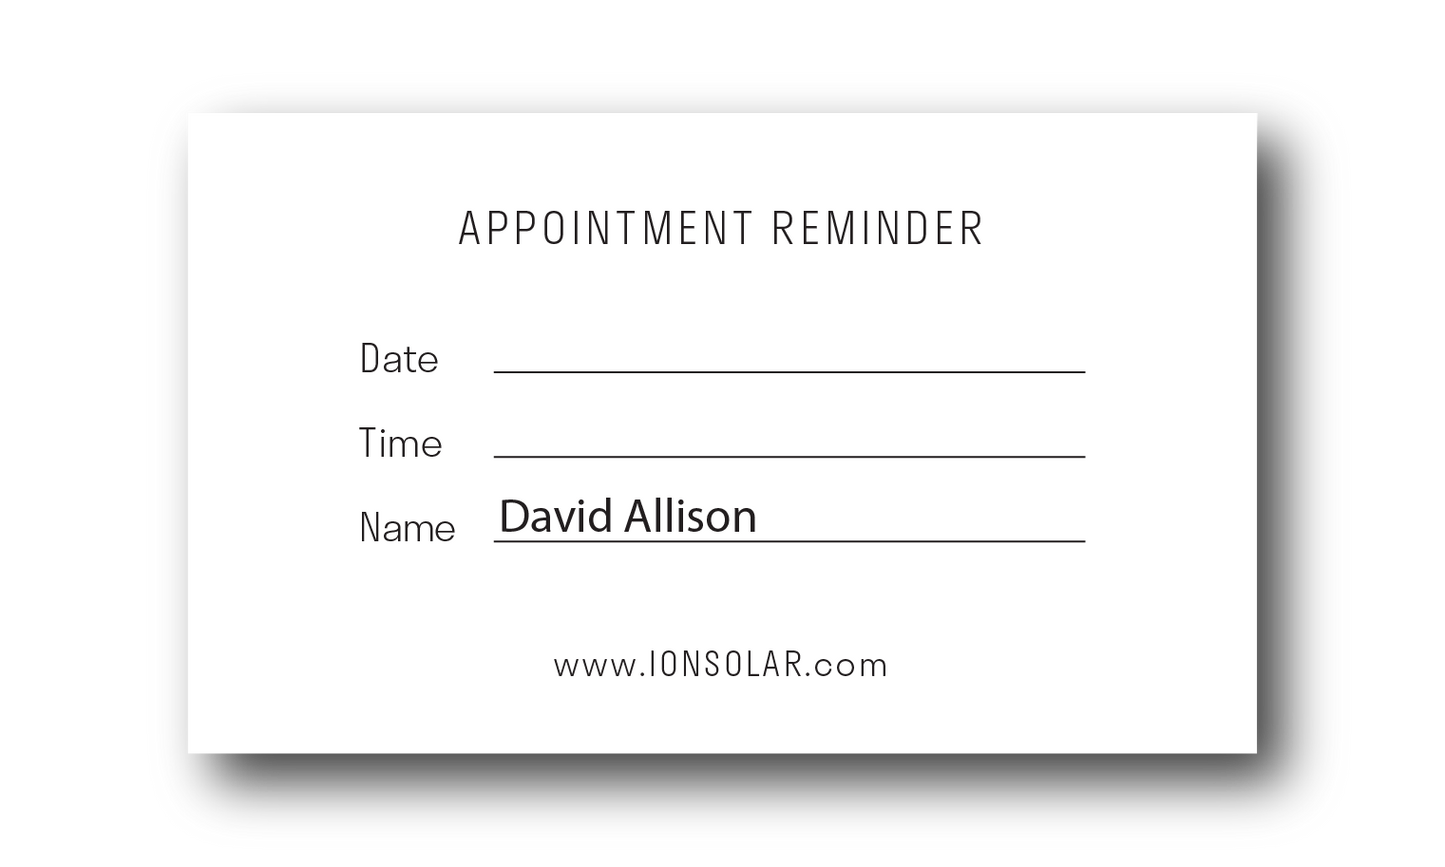 ION Appointment Reminder (3.5"x 2")